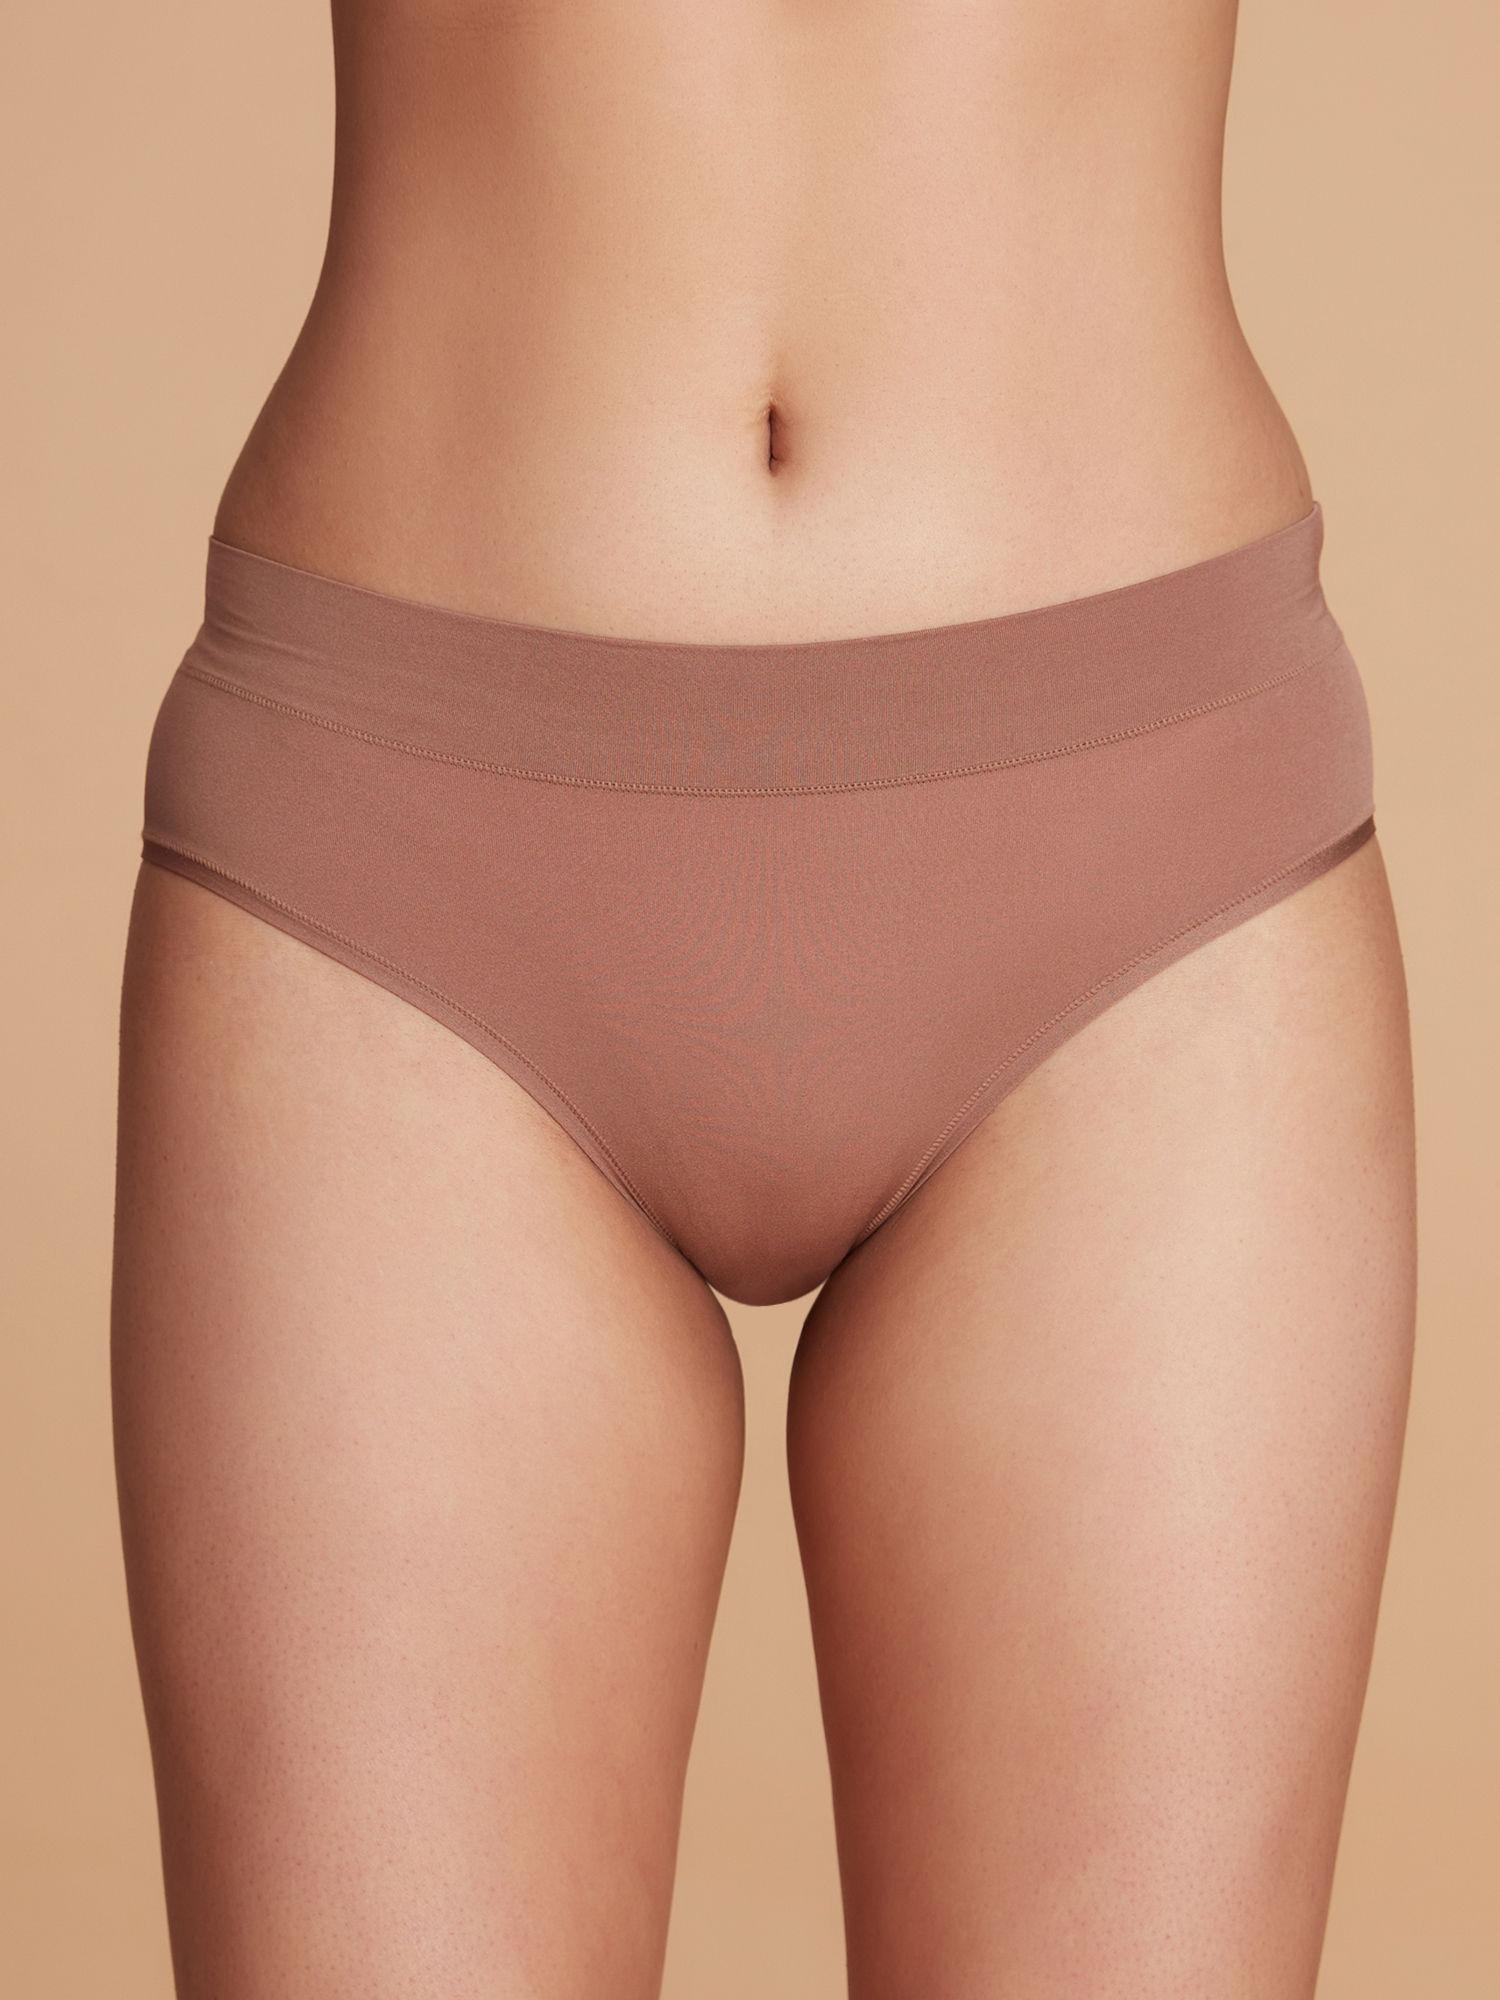 4 way stretch hipster panty - nyp342 - brown